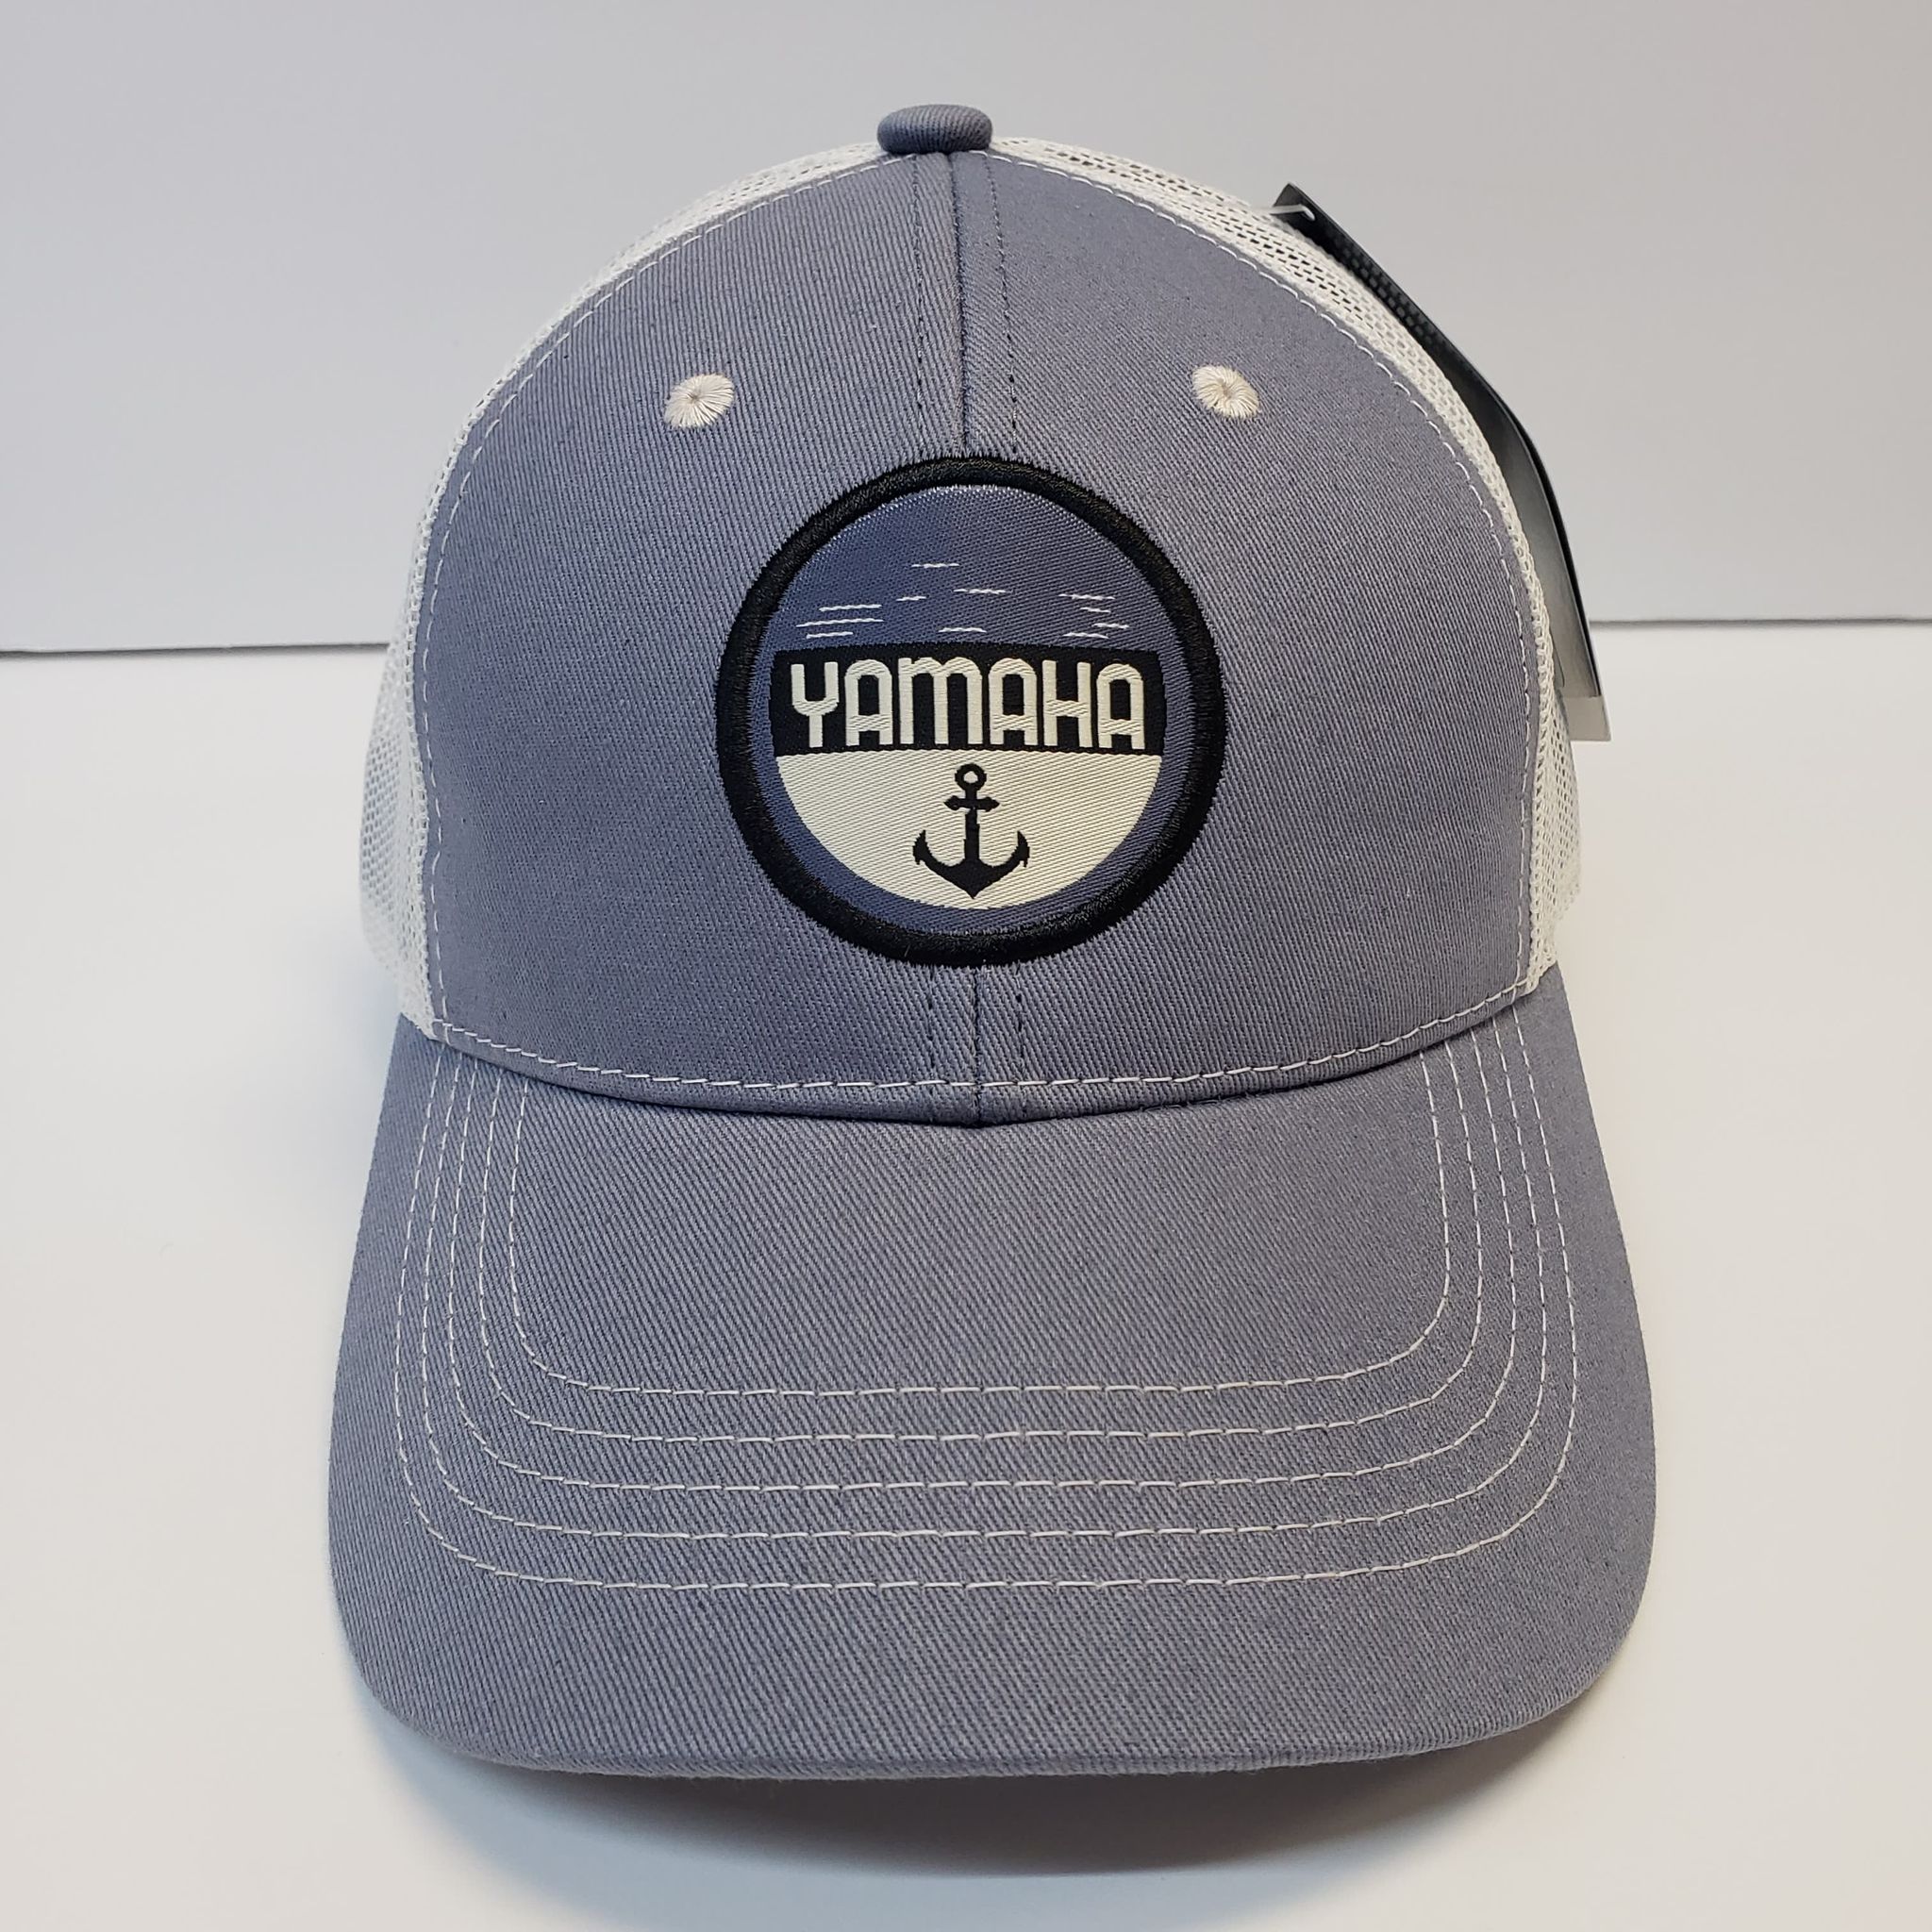 New Authentic Yamaha Hat-Anchor/Blue/White Mesh – The Loft at